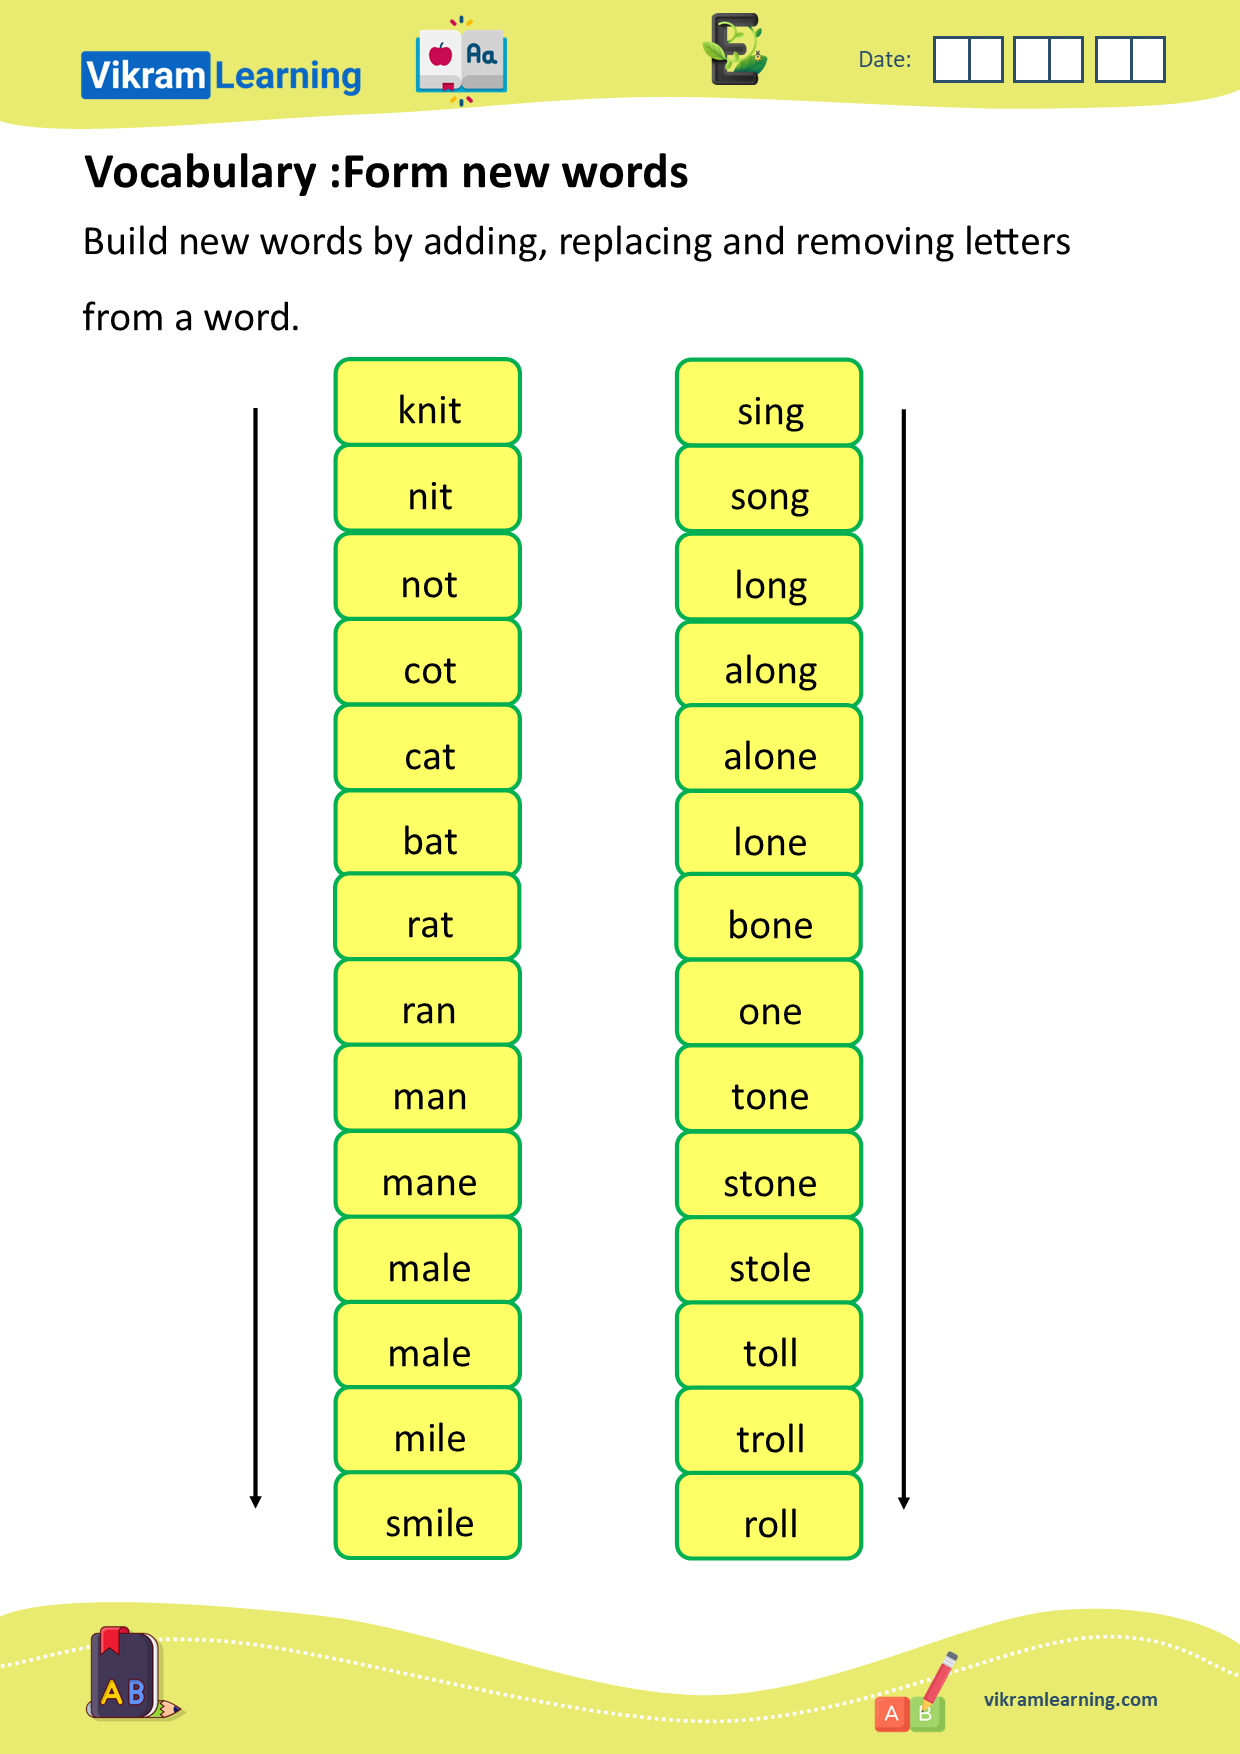 Download vocabulary: unscramble words, form new words, words ladder, forming new words by adding, removing, or replacing letters, build new words, example: male, mall, small, knit, nit, not, cot, cat, etc. worksheets